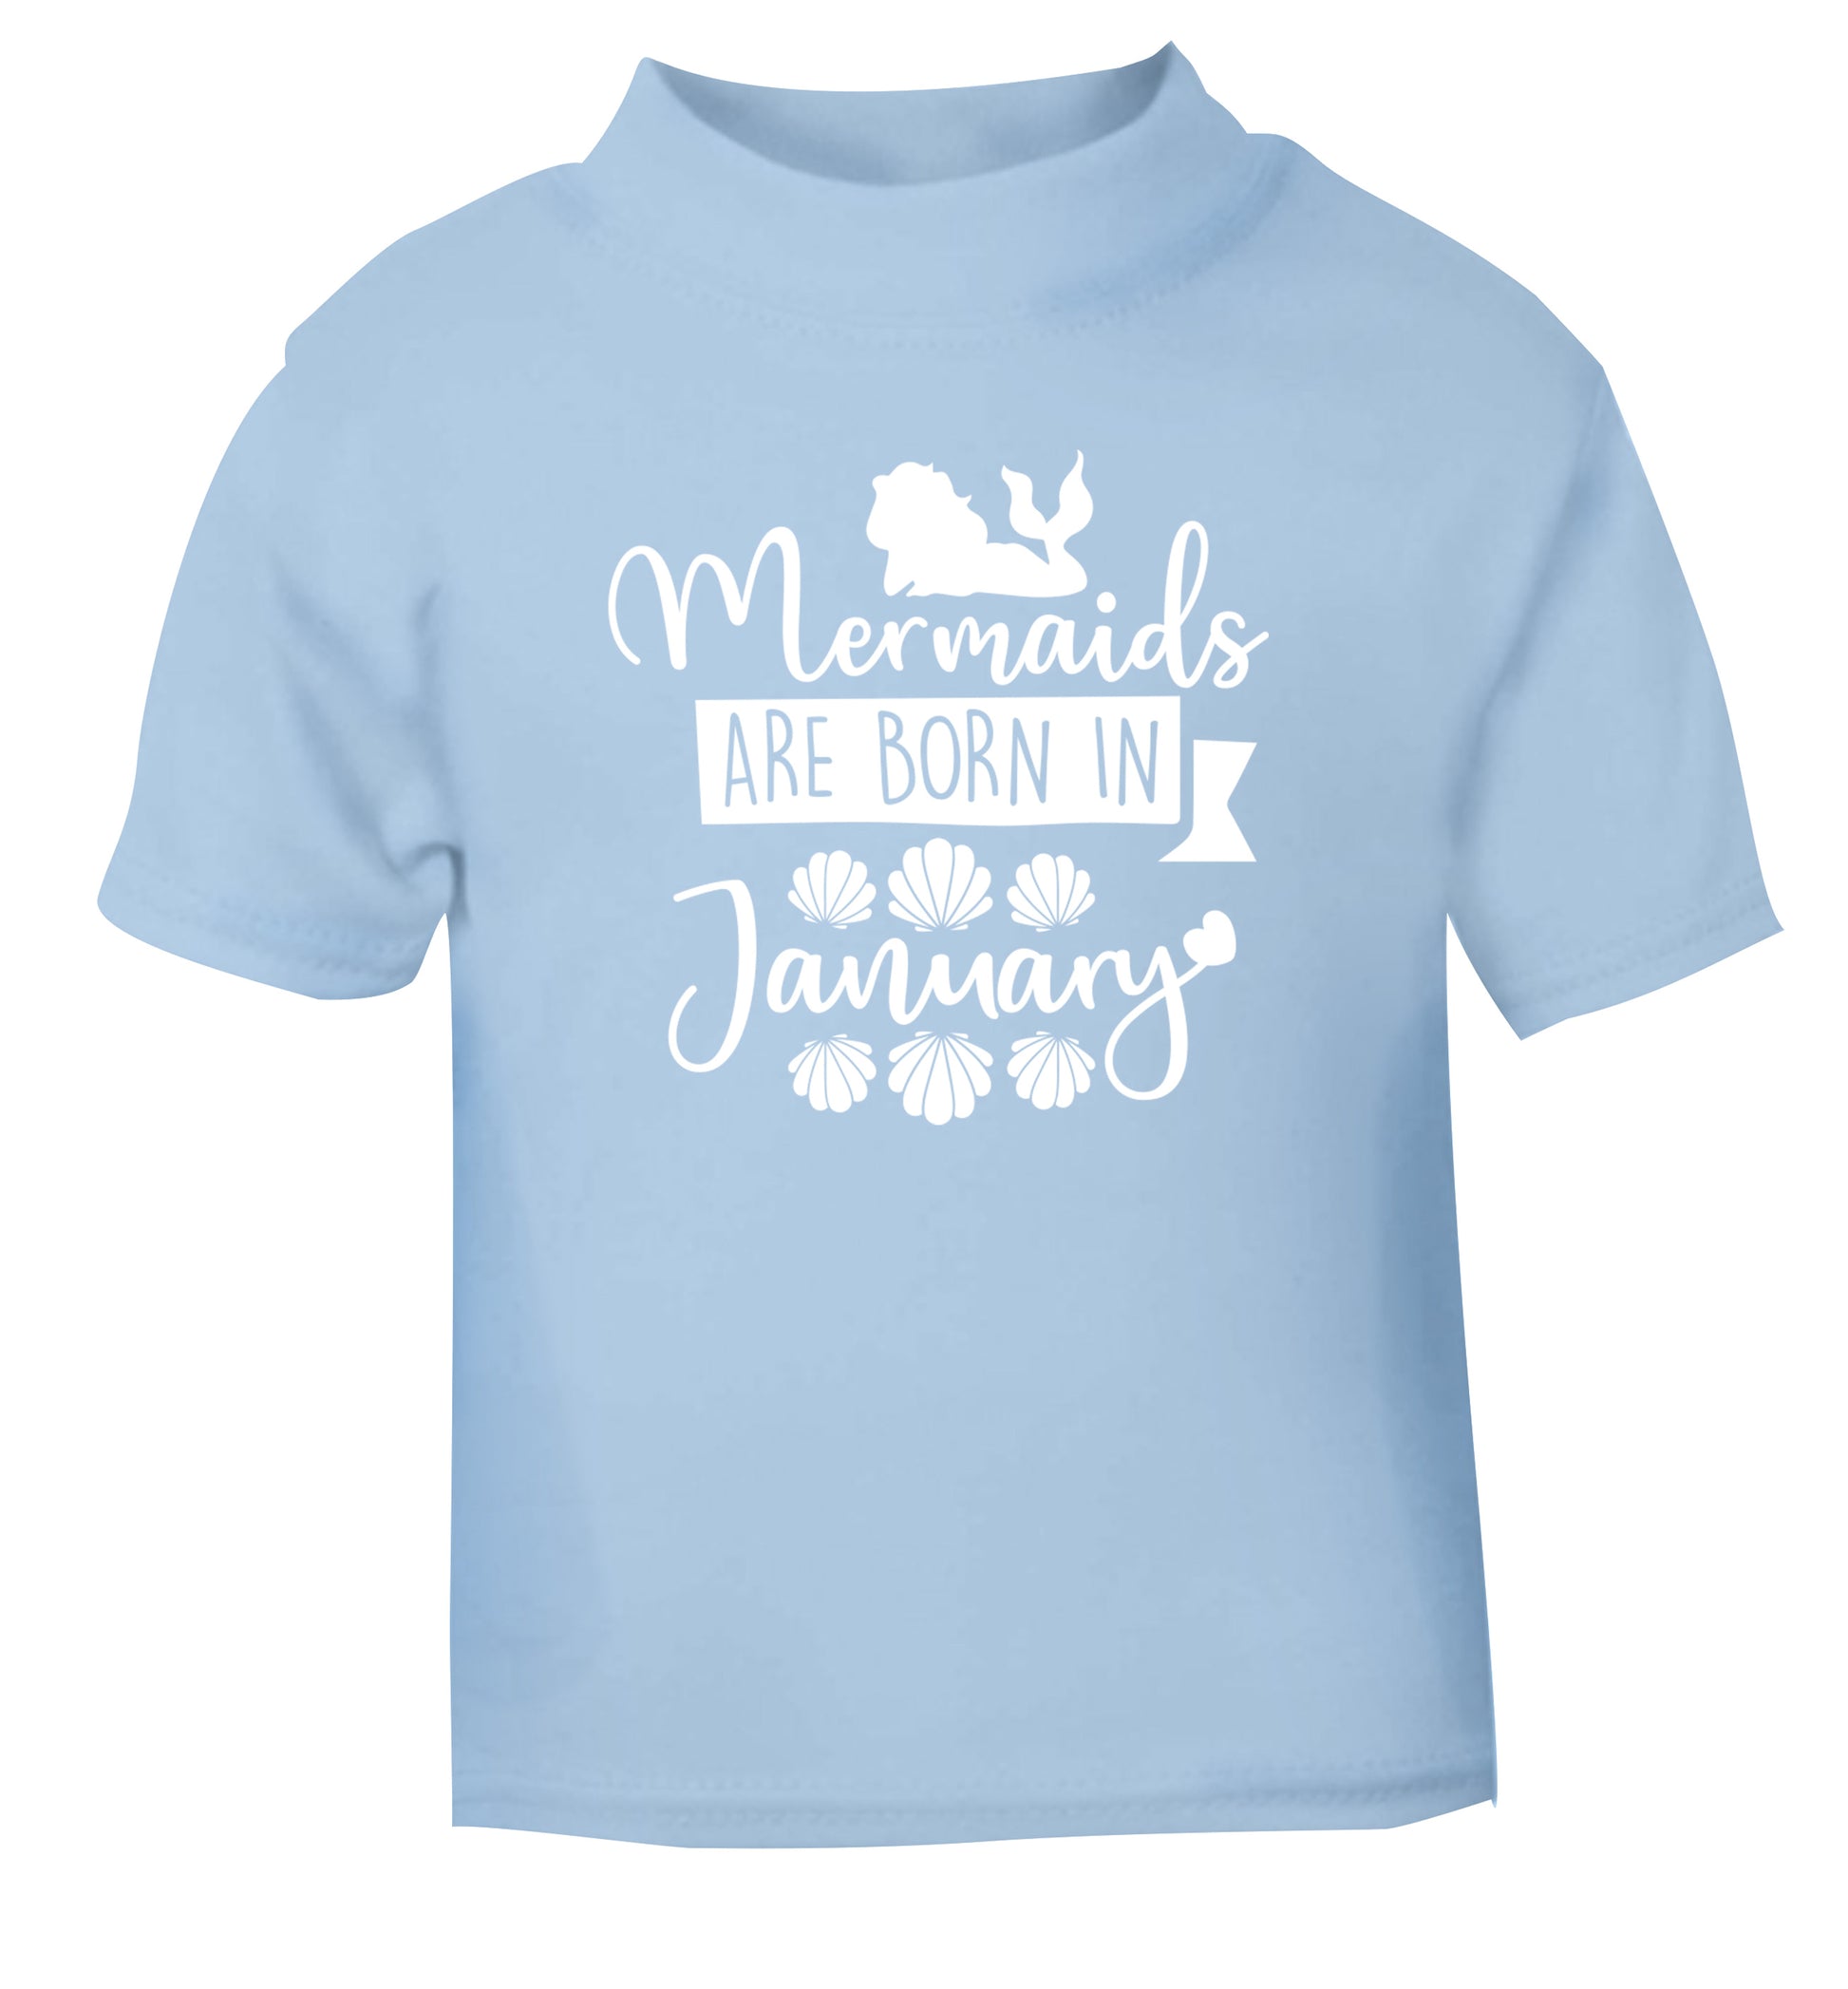 Mermaids are born in January light blue Baby Toddler Tshirt 2 Years